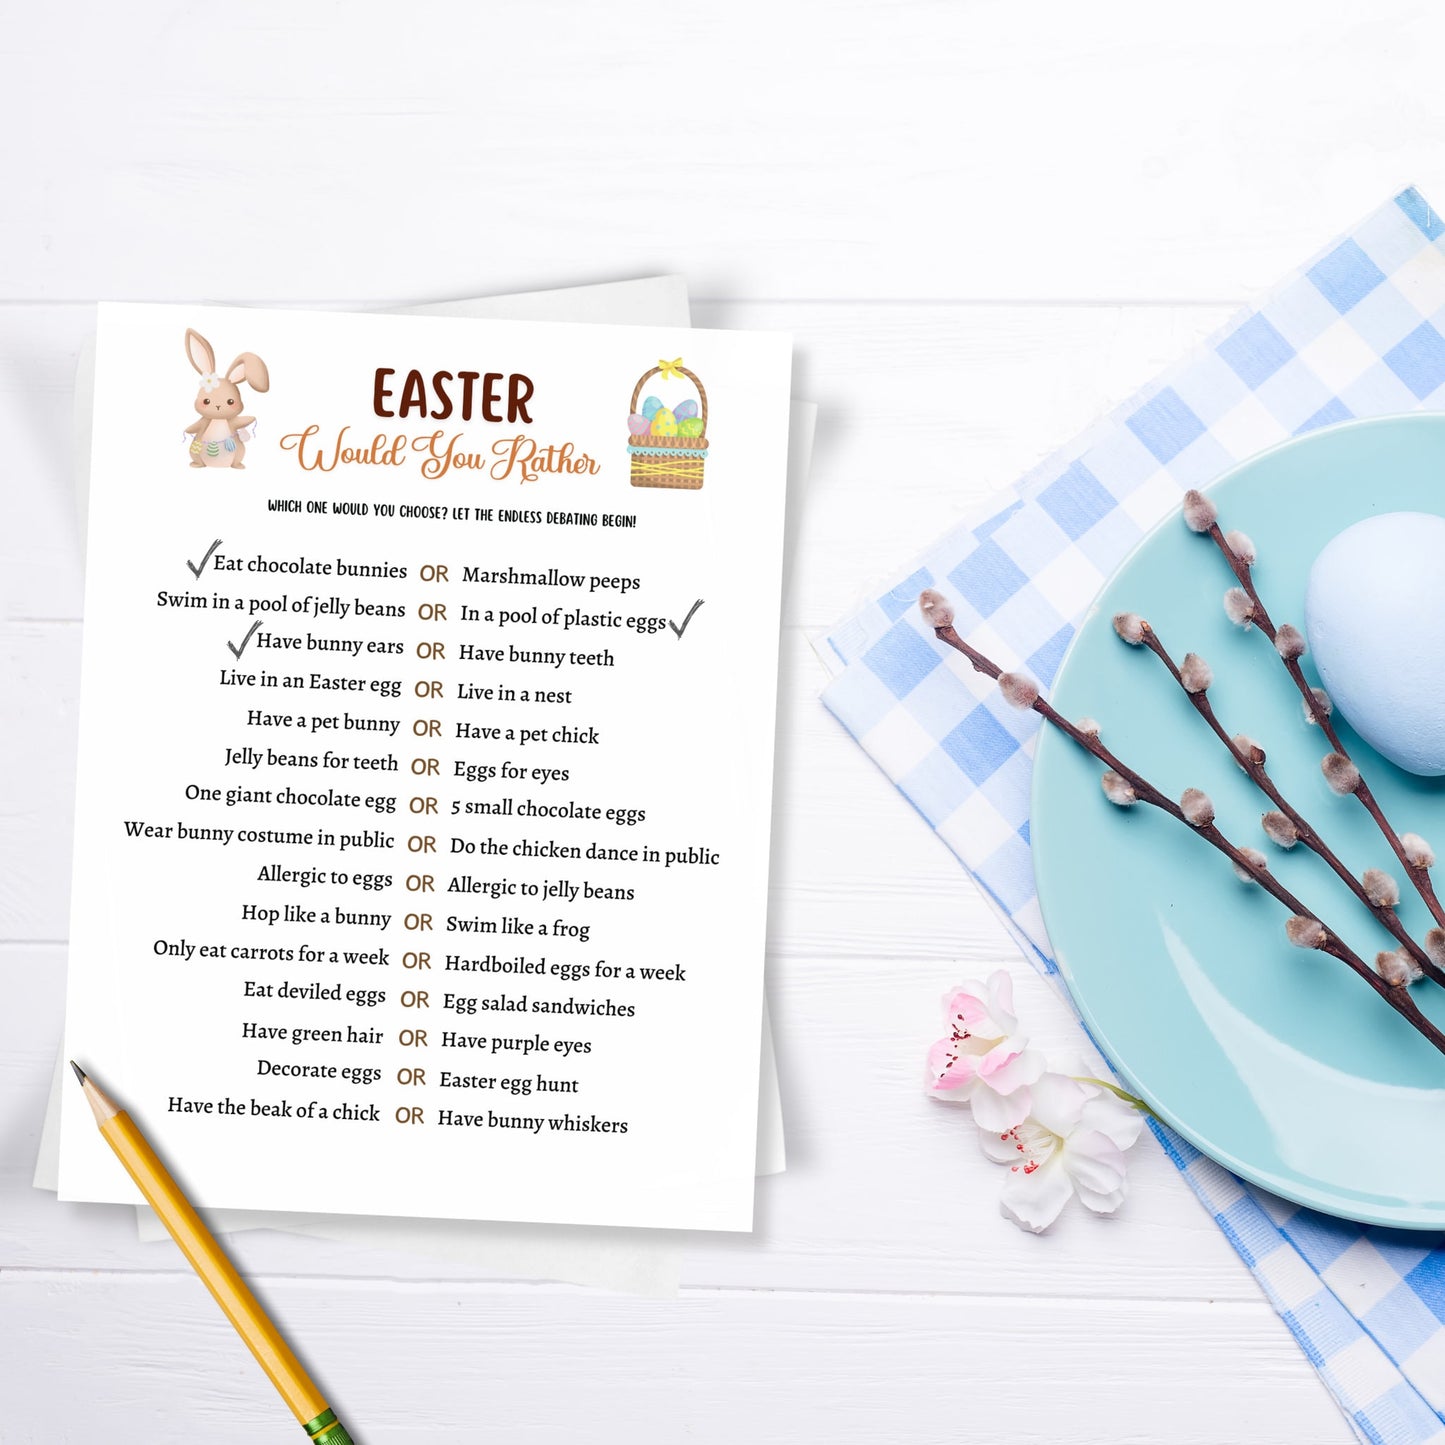 Easter Would You Rather Game Printable, This or That Easter Party Game, Kids Easter Activity, Fun Easter Dinner Game Adults, Easter Sunday